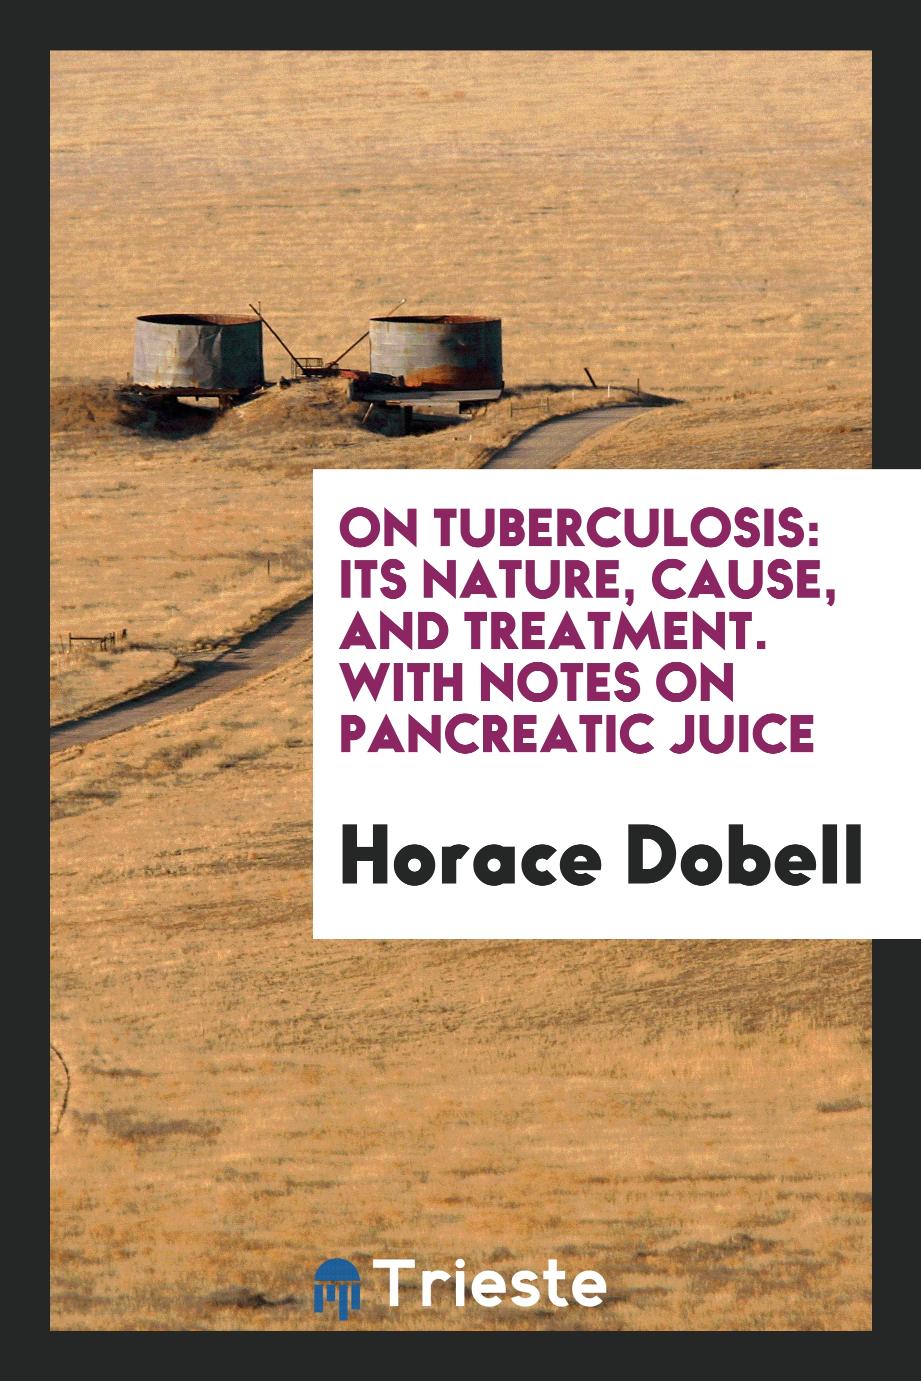 On Tuberculosis: Its Nature, Cause, and Treatment. With Notes on Pancreatic Juice